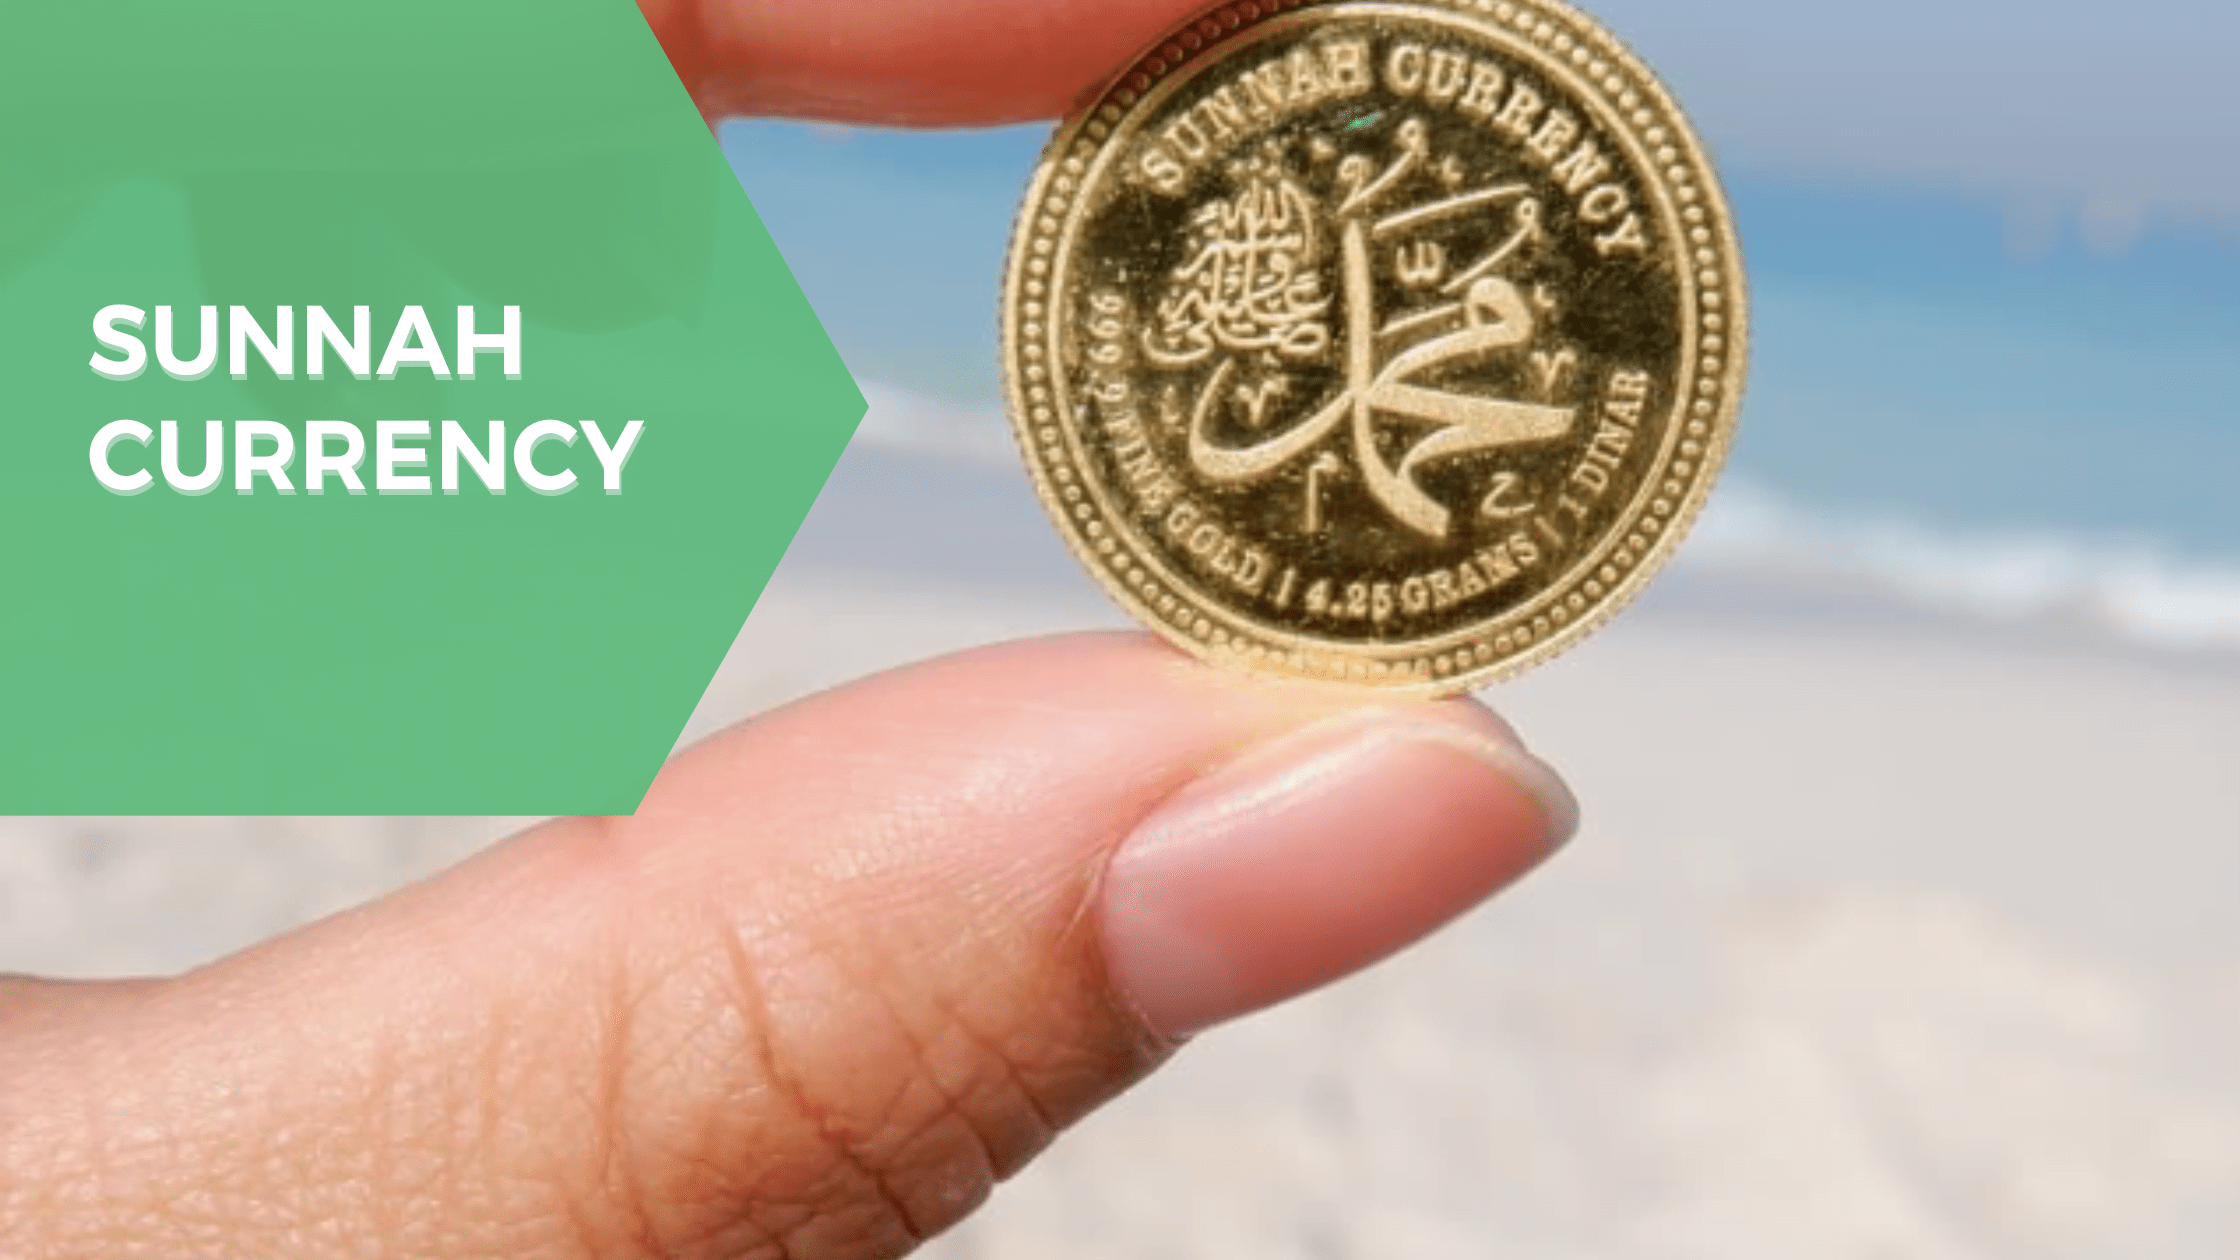 Sunnah Currency Sharia-Compliant Gold and Silver Coins and Bullion Bars